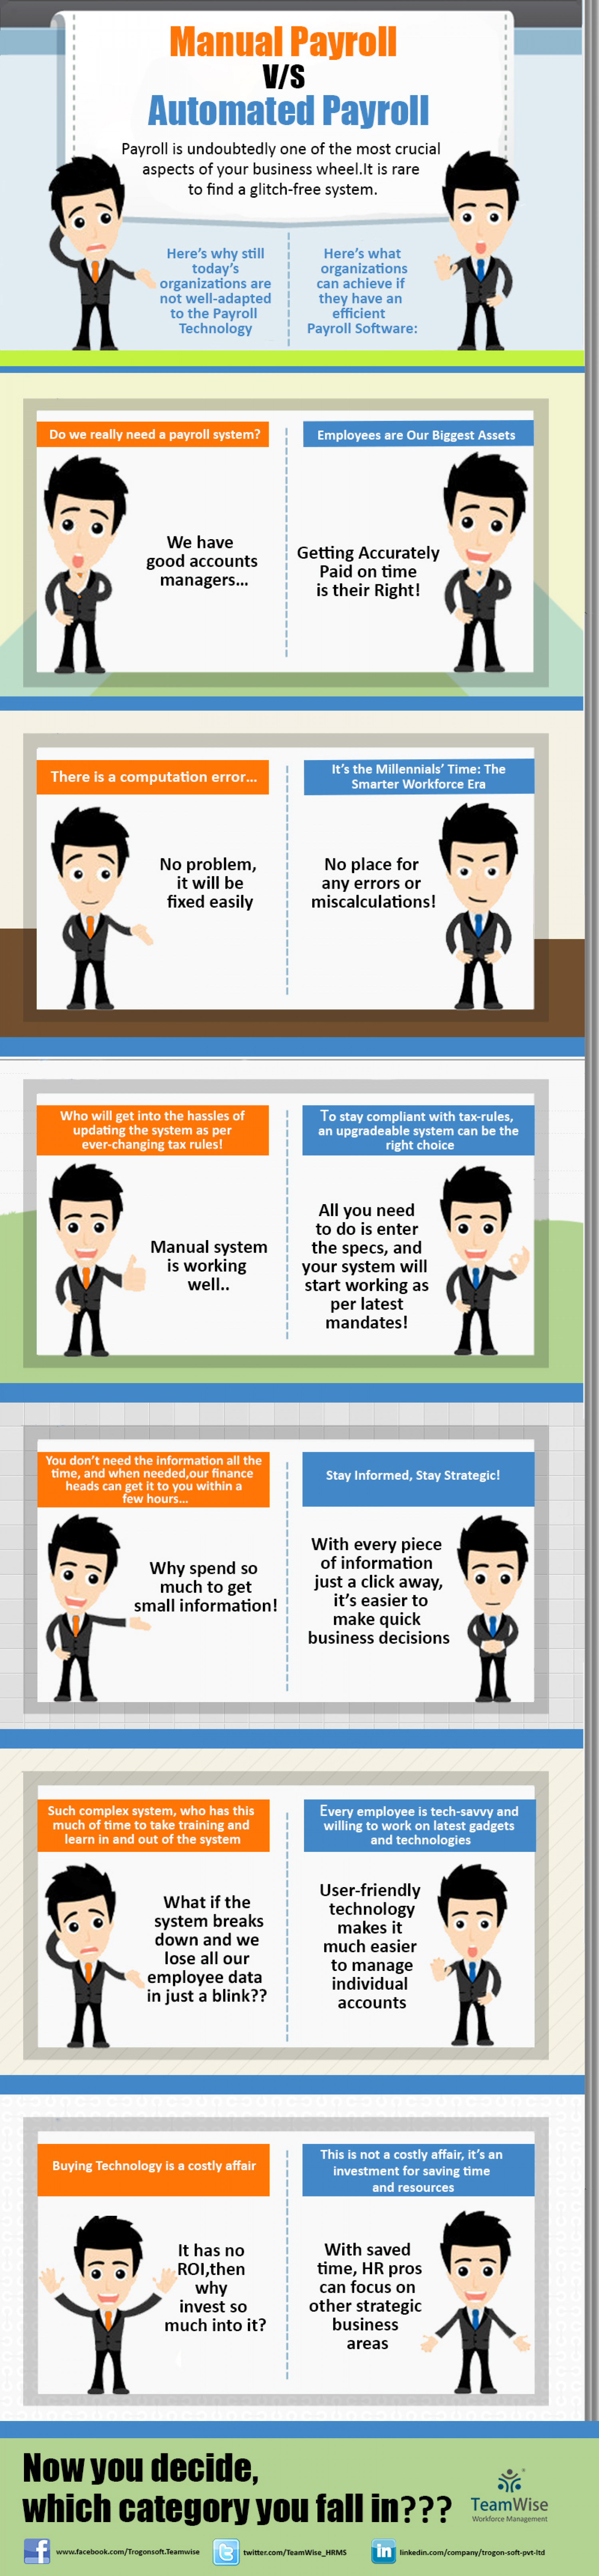 Why Use Payroll Technology v/s Definitely Use Payroll Technology Infographic